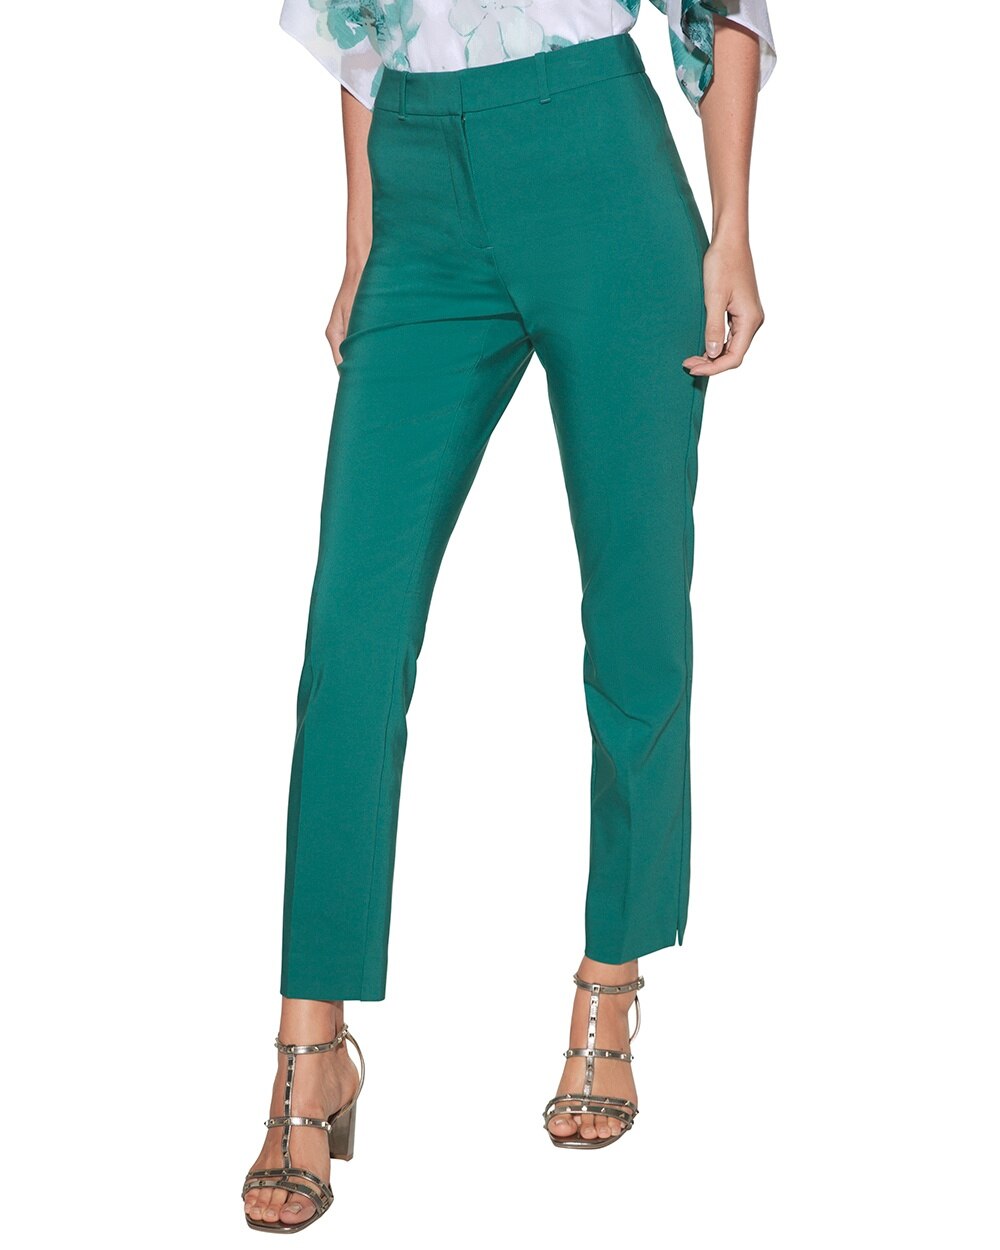 Outlet WHBM The Slim Ankle Pants